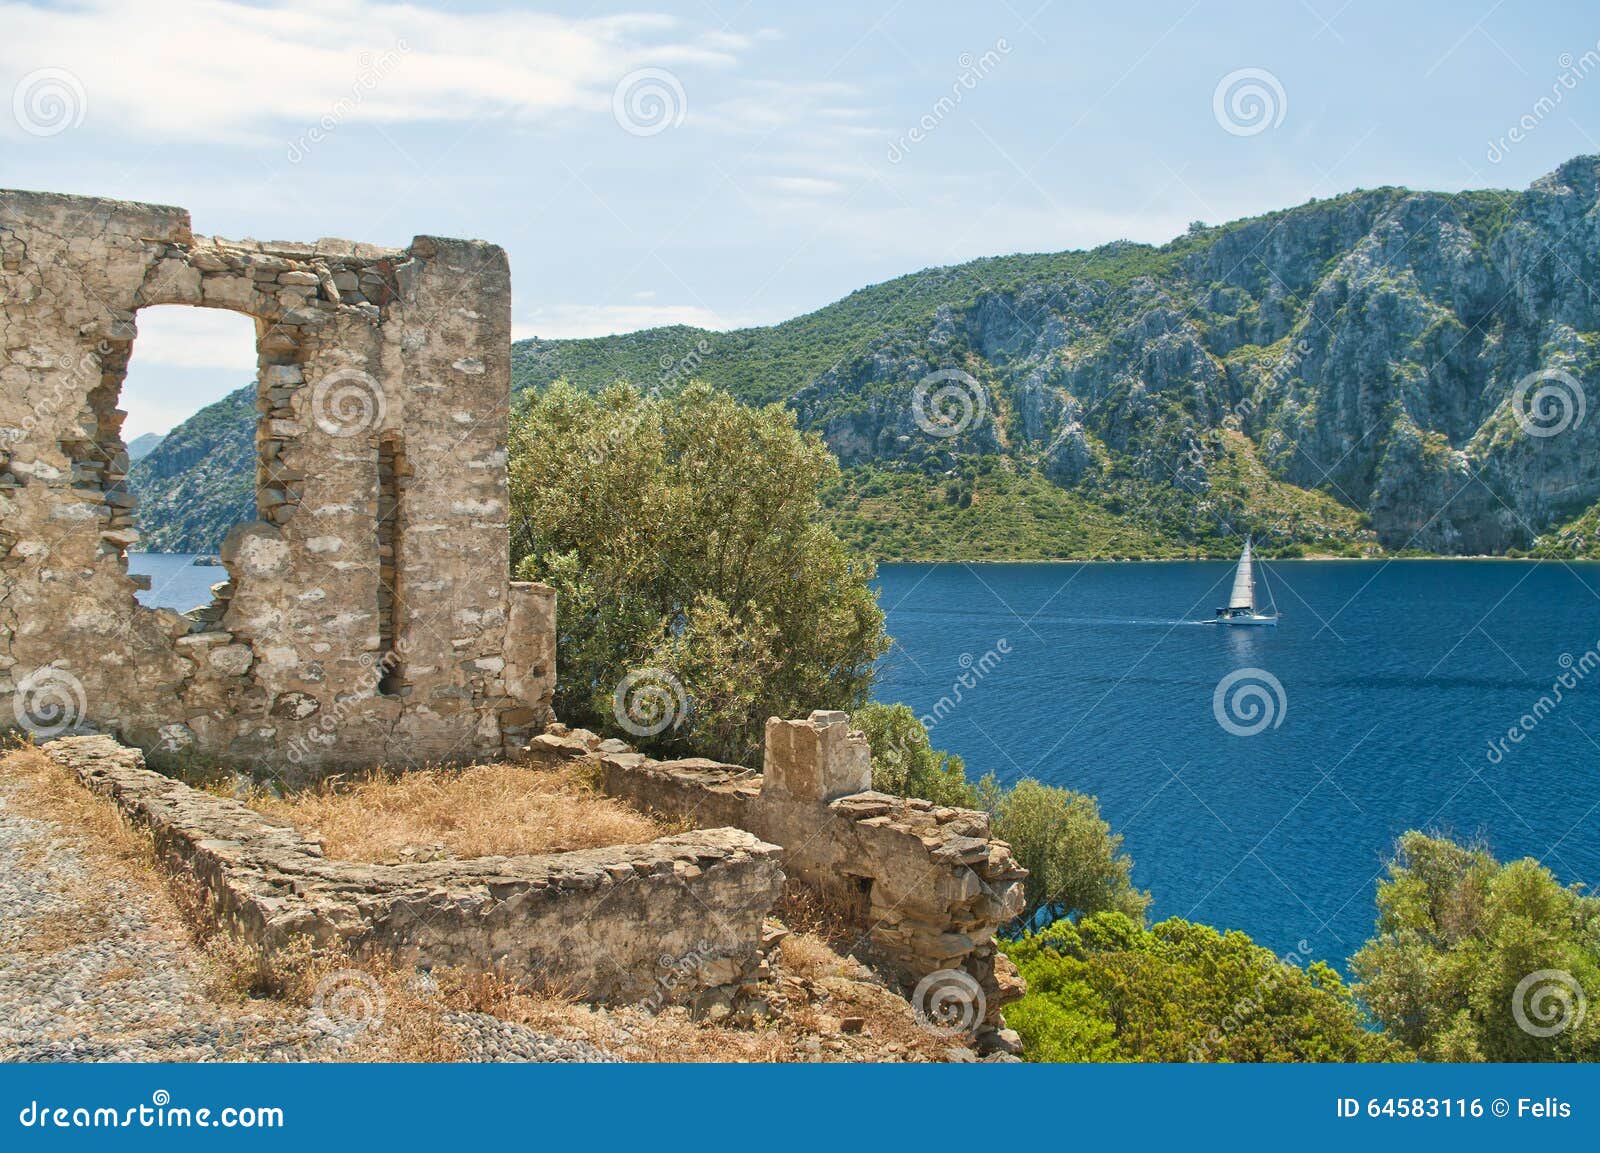 medieval ruins with sea and mountains at background